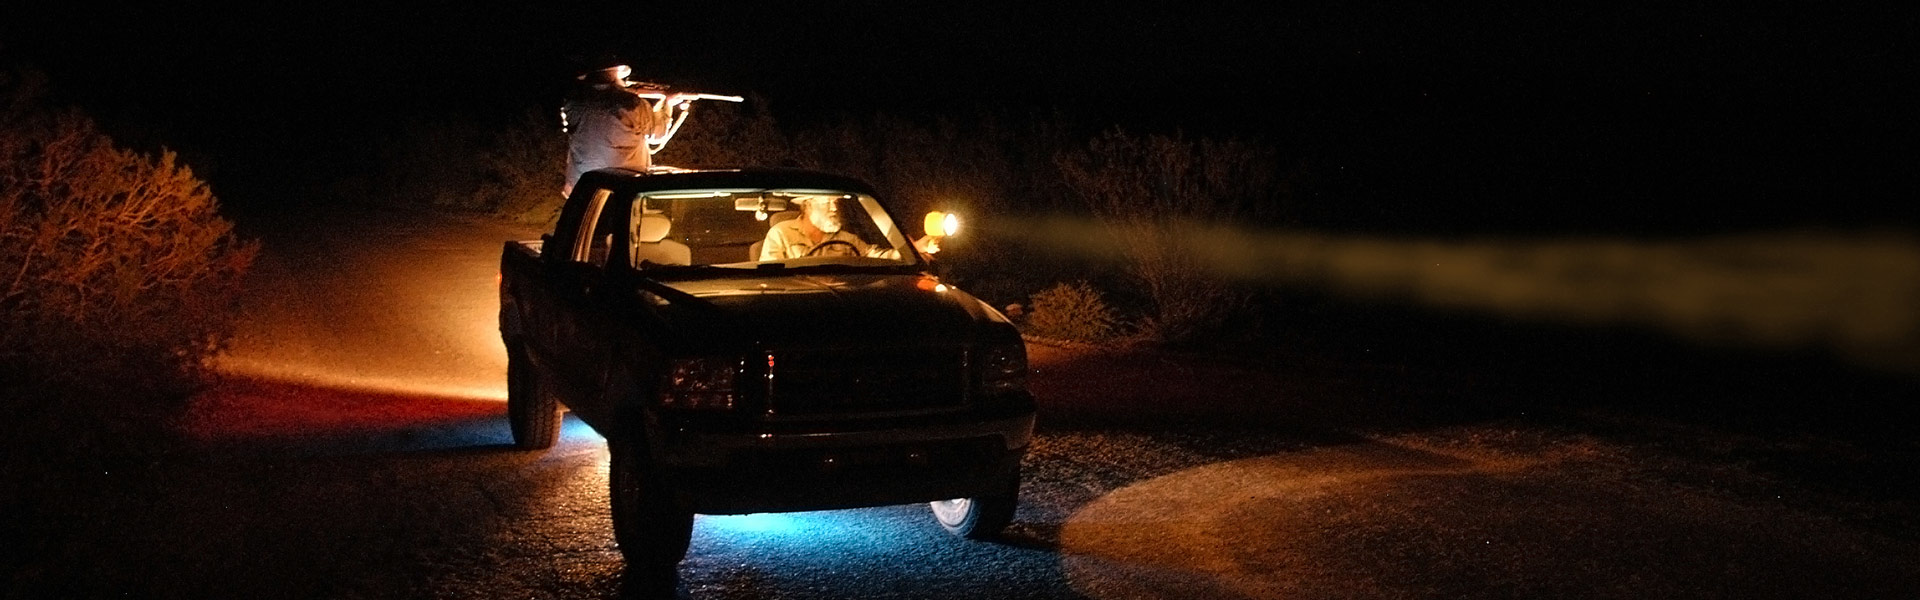 FWP wardens in a truck using lights to look out into a field at night.